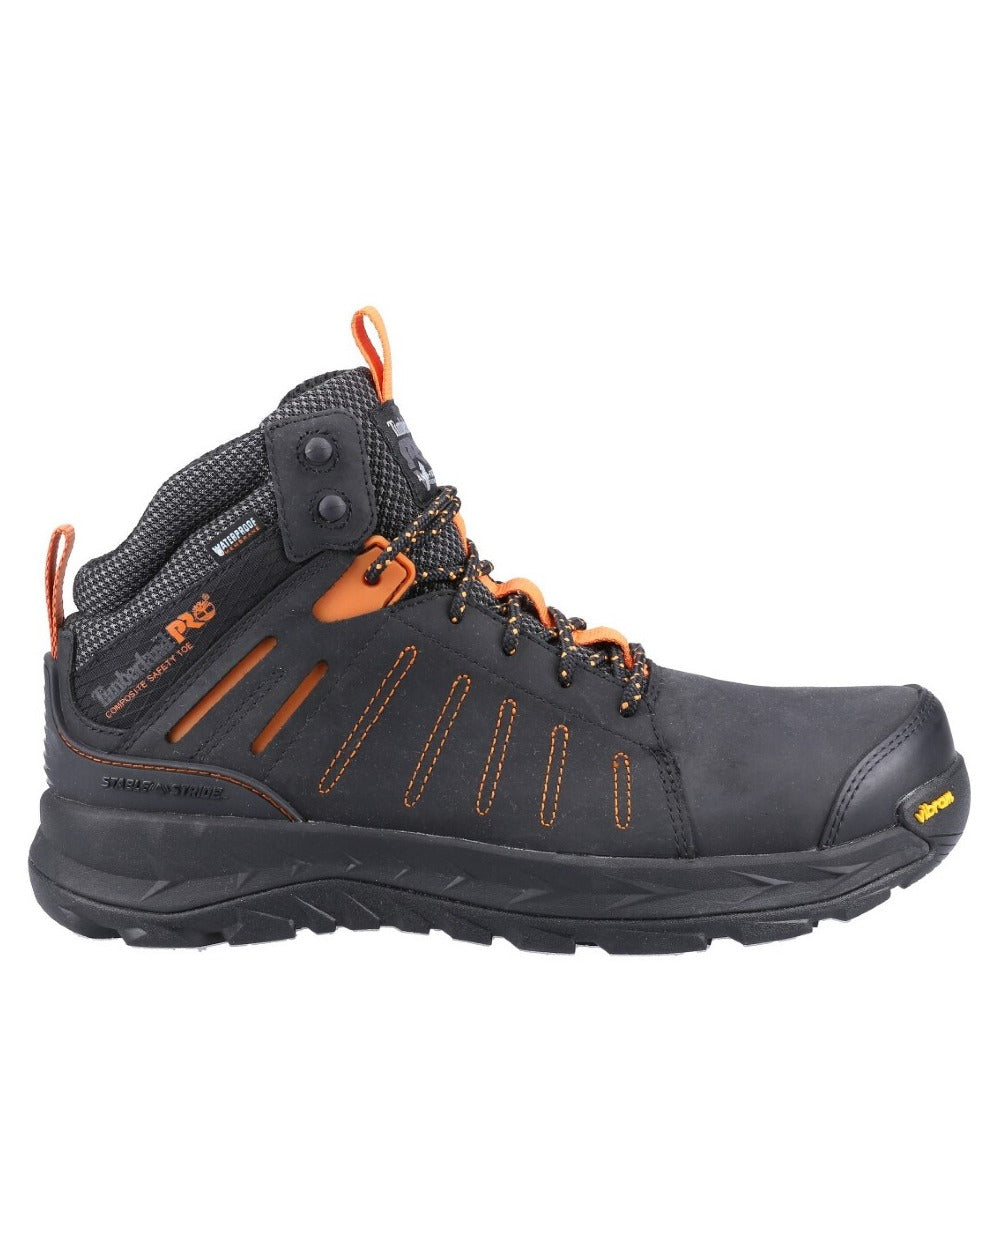 Black coloured Timberland Pro Trailwind Work Boots on white background 